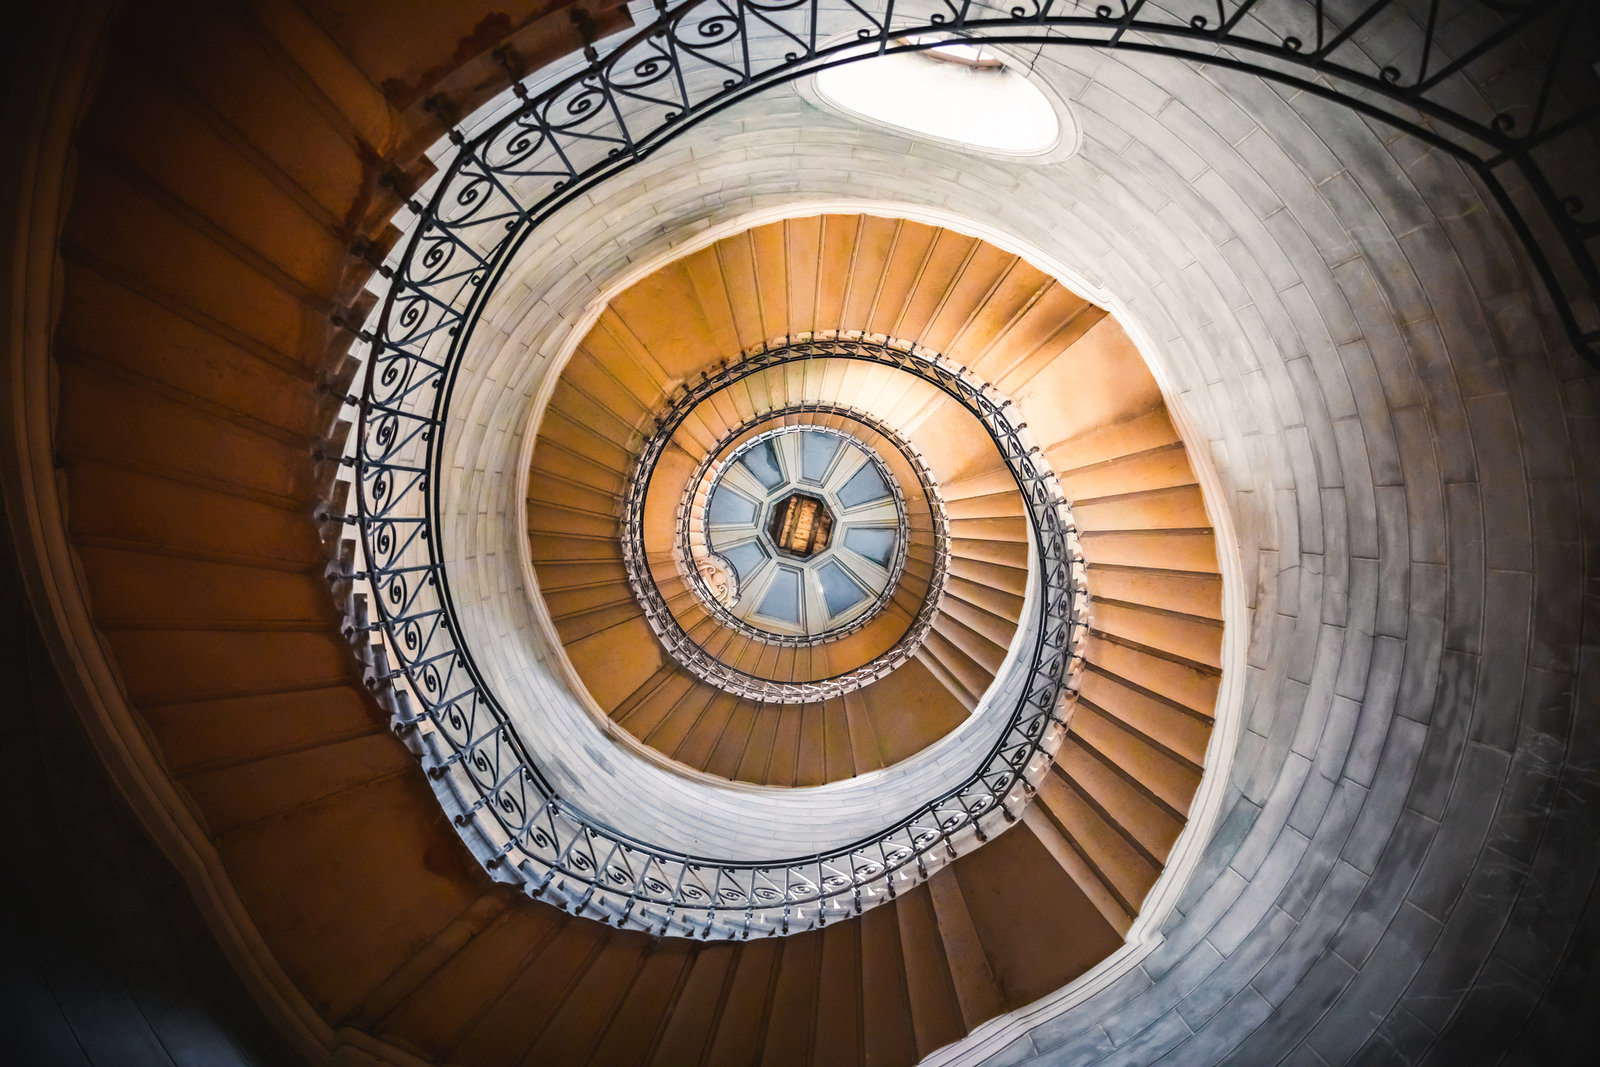 stock image of a spiral staircase taken from a bird's eye view